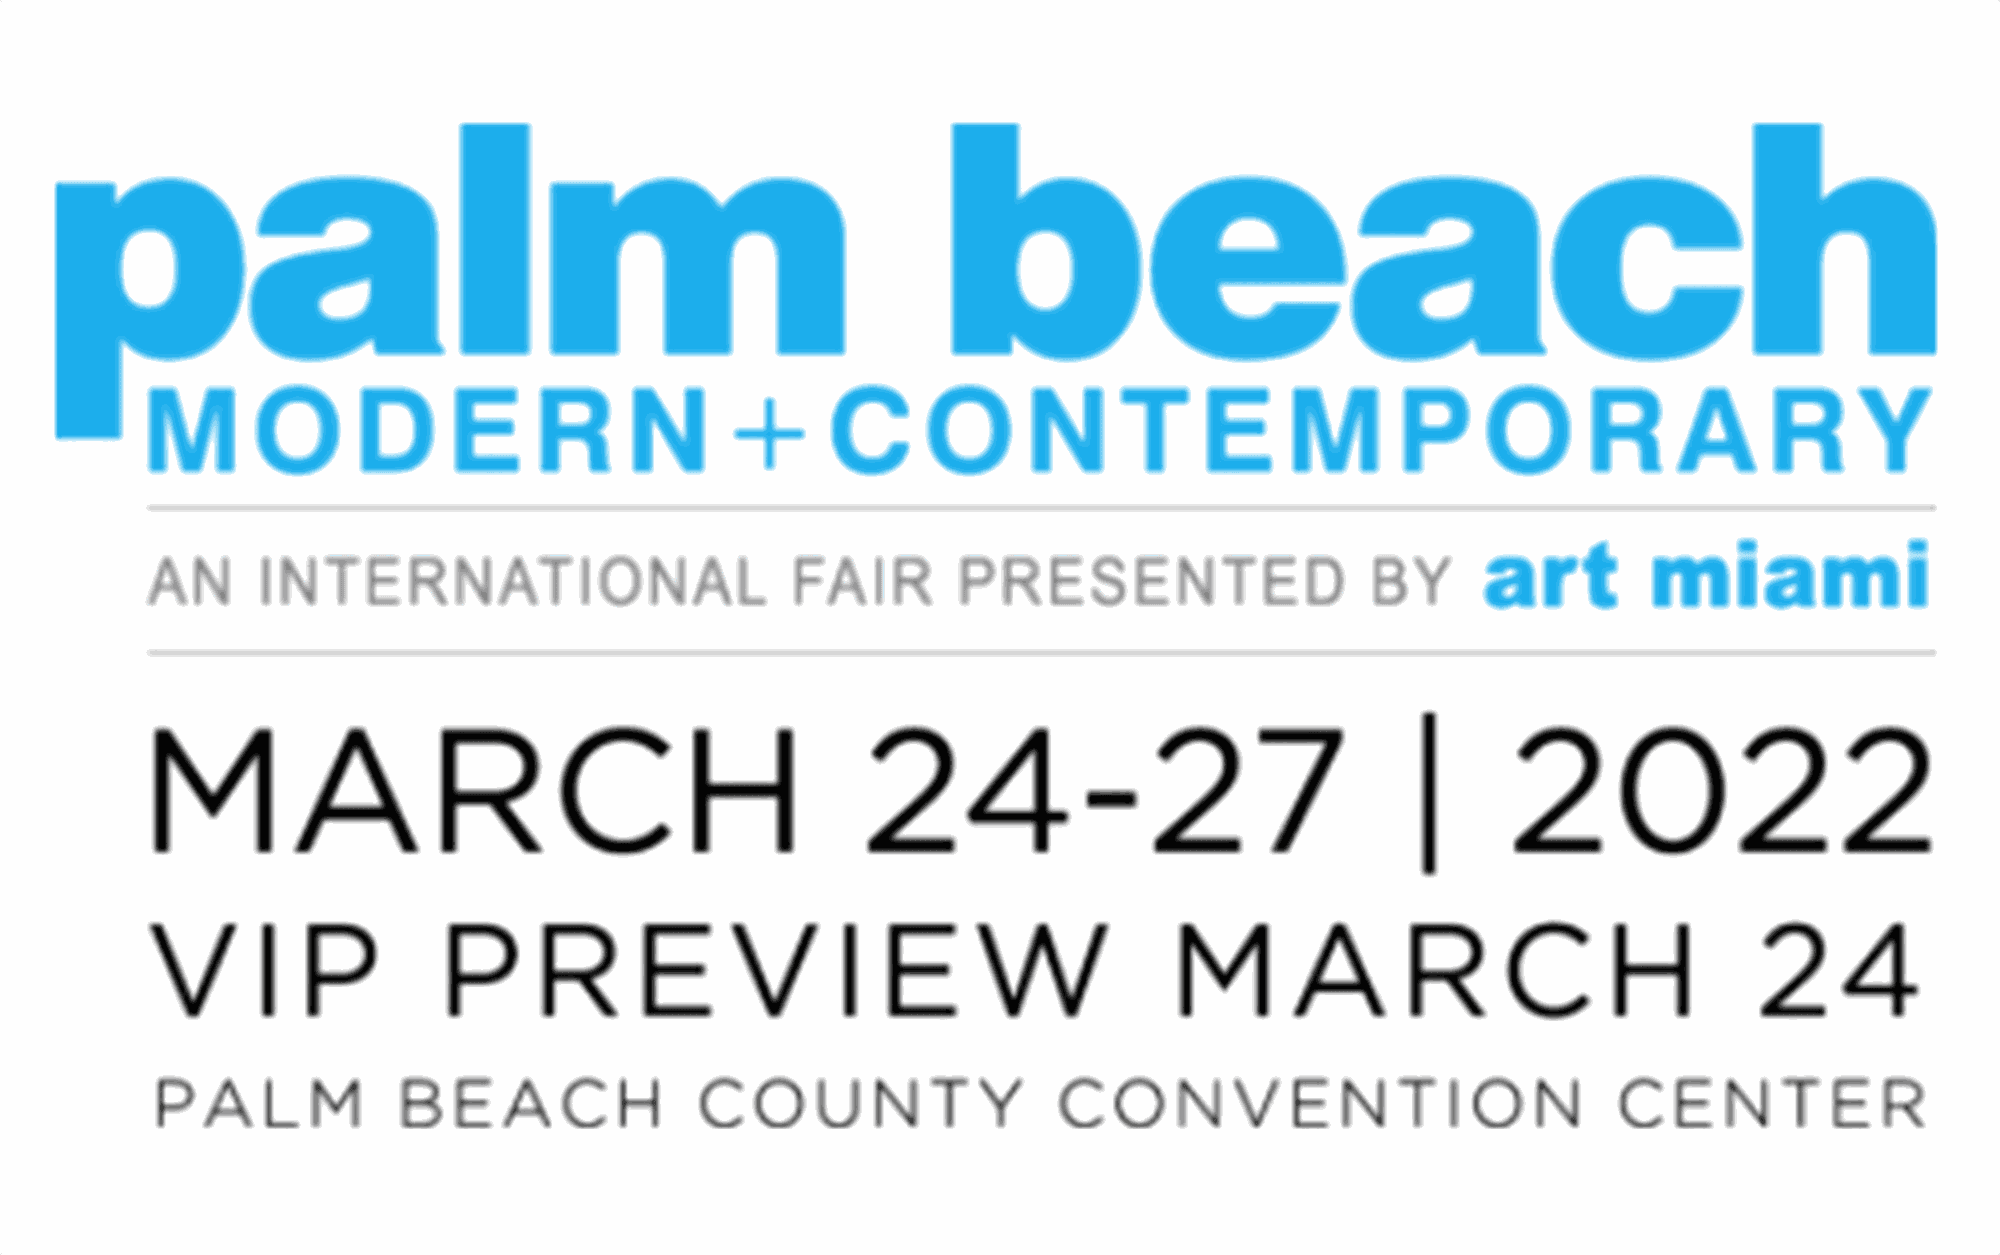 light blue logo for palm beach modern and contemporary with show dates march 24 through march 27